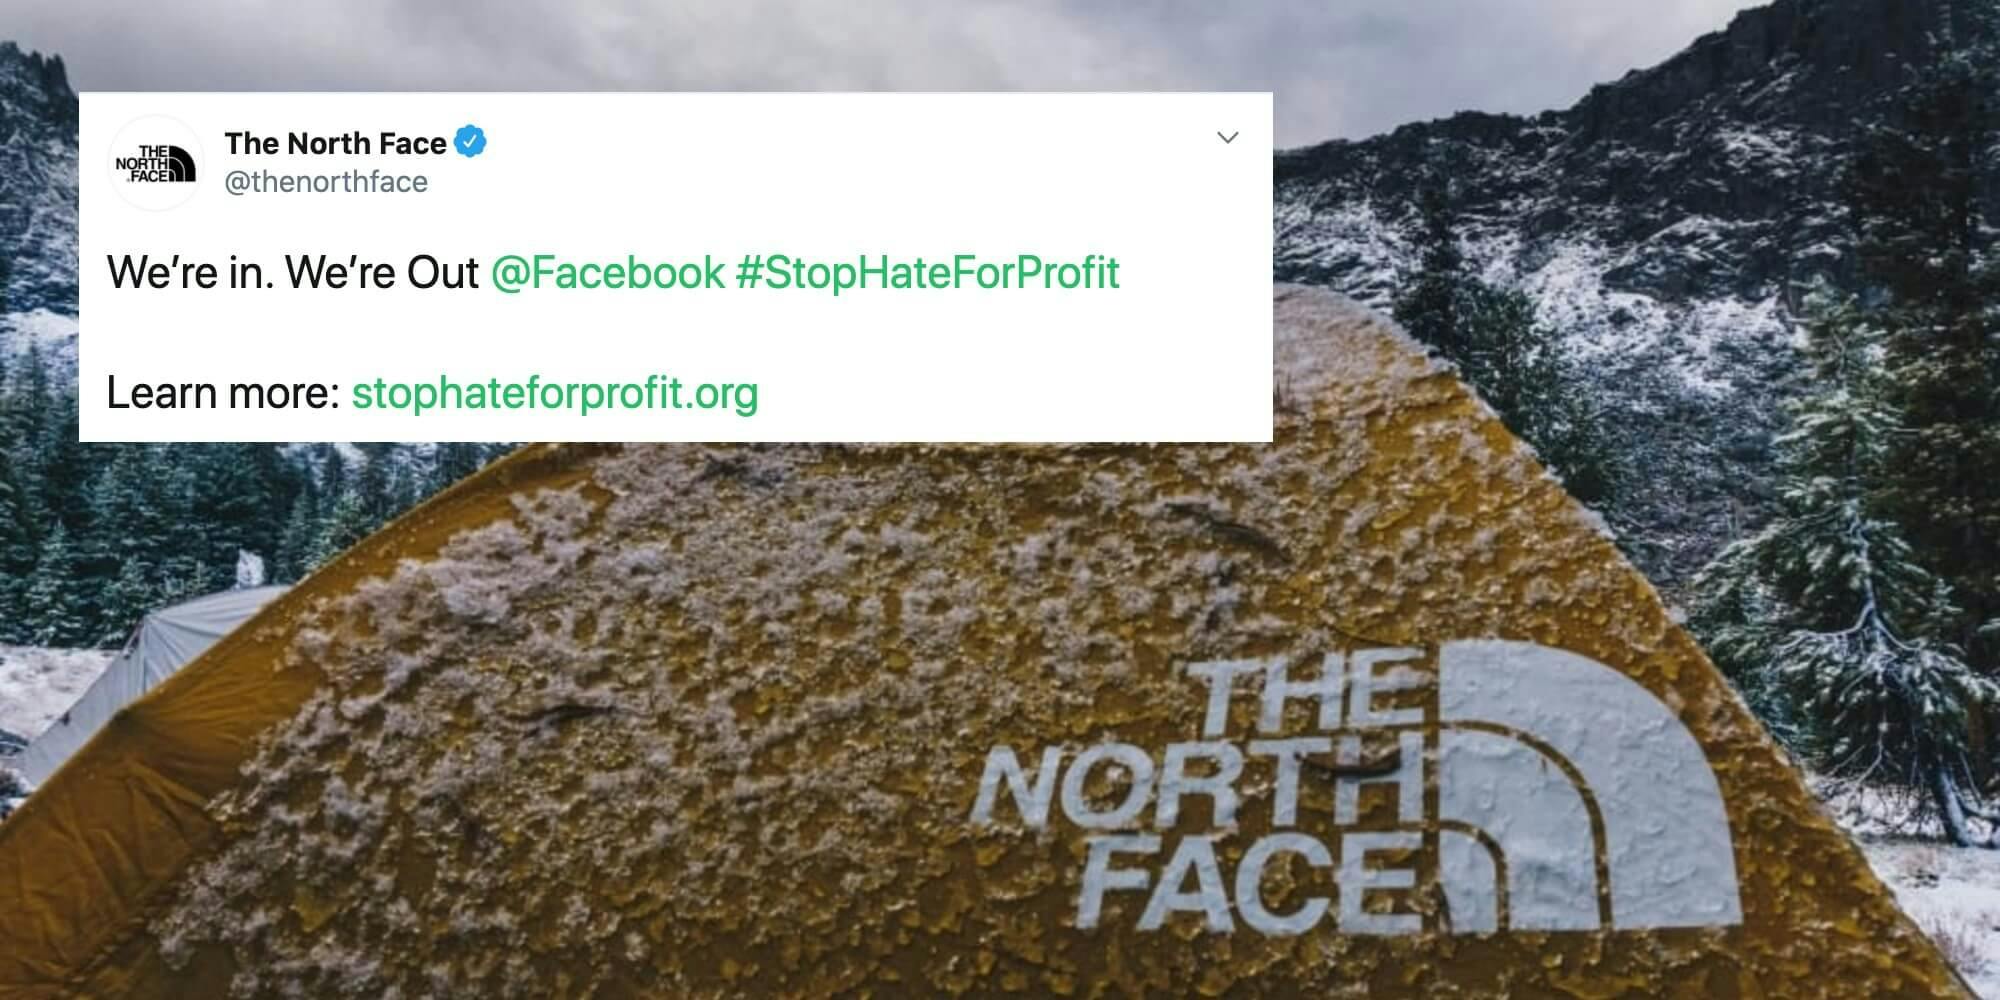 The North Face Announces It's Pulling Its Ads From Facebook